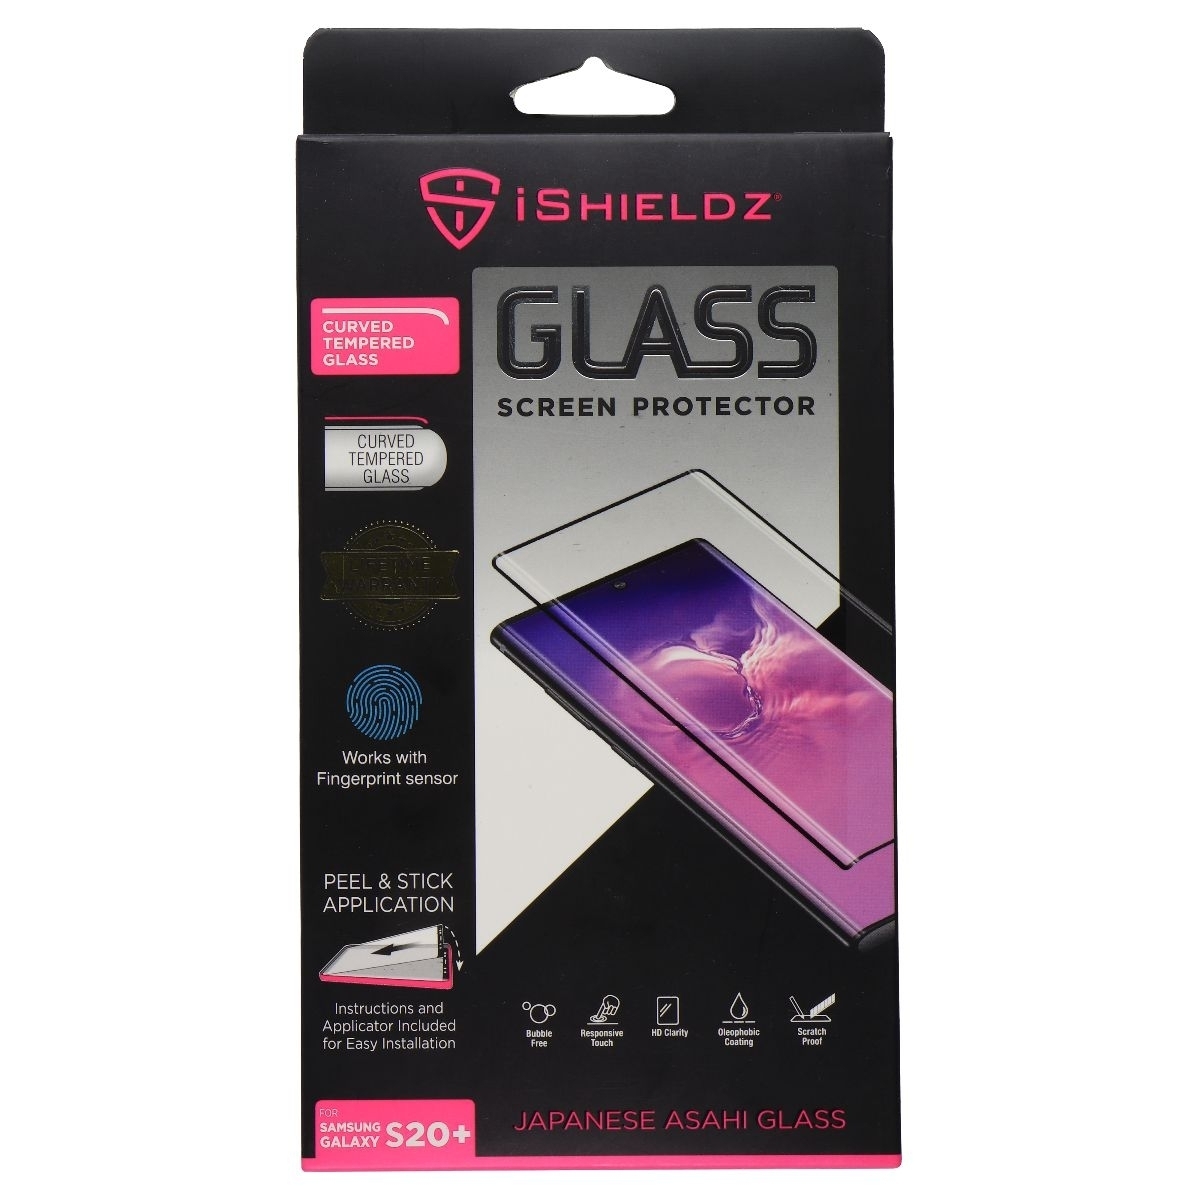 IShieldz Curved Tempered Glass Screen Protector For Samsung Galaxy (S20+) (Refurbished)